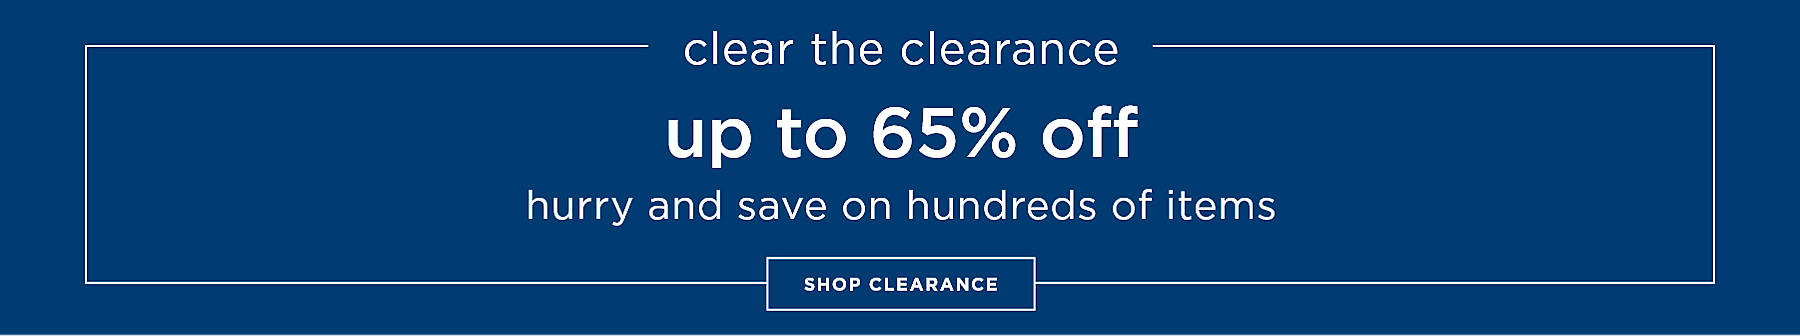 Clear the Clearance Up to 65% Off Hurry and save on hundreds of items Shop Clearance